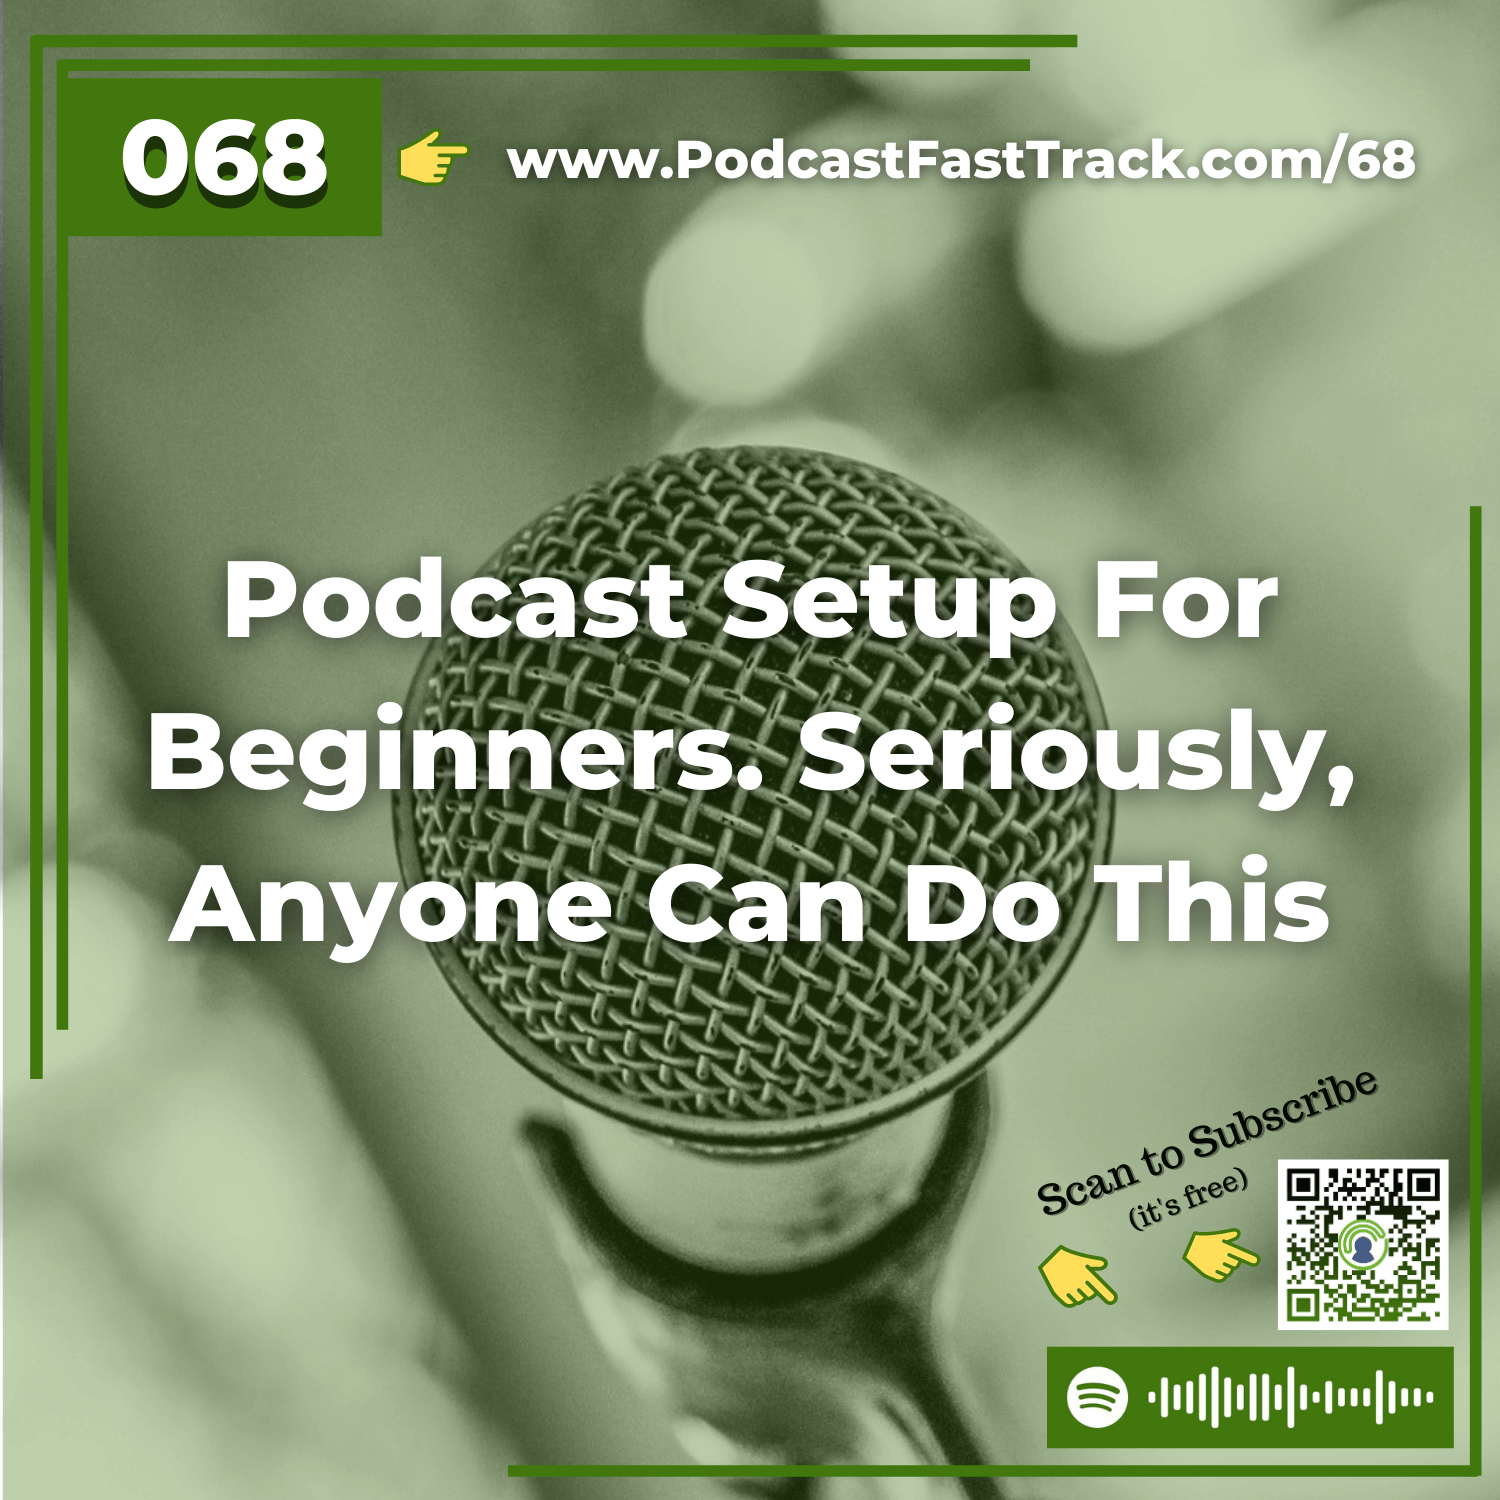 68: Podcast Setup For Beginners. Seriously, Anyone Can Do This